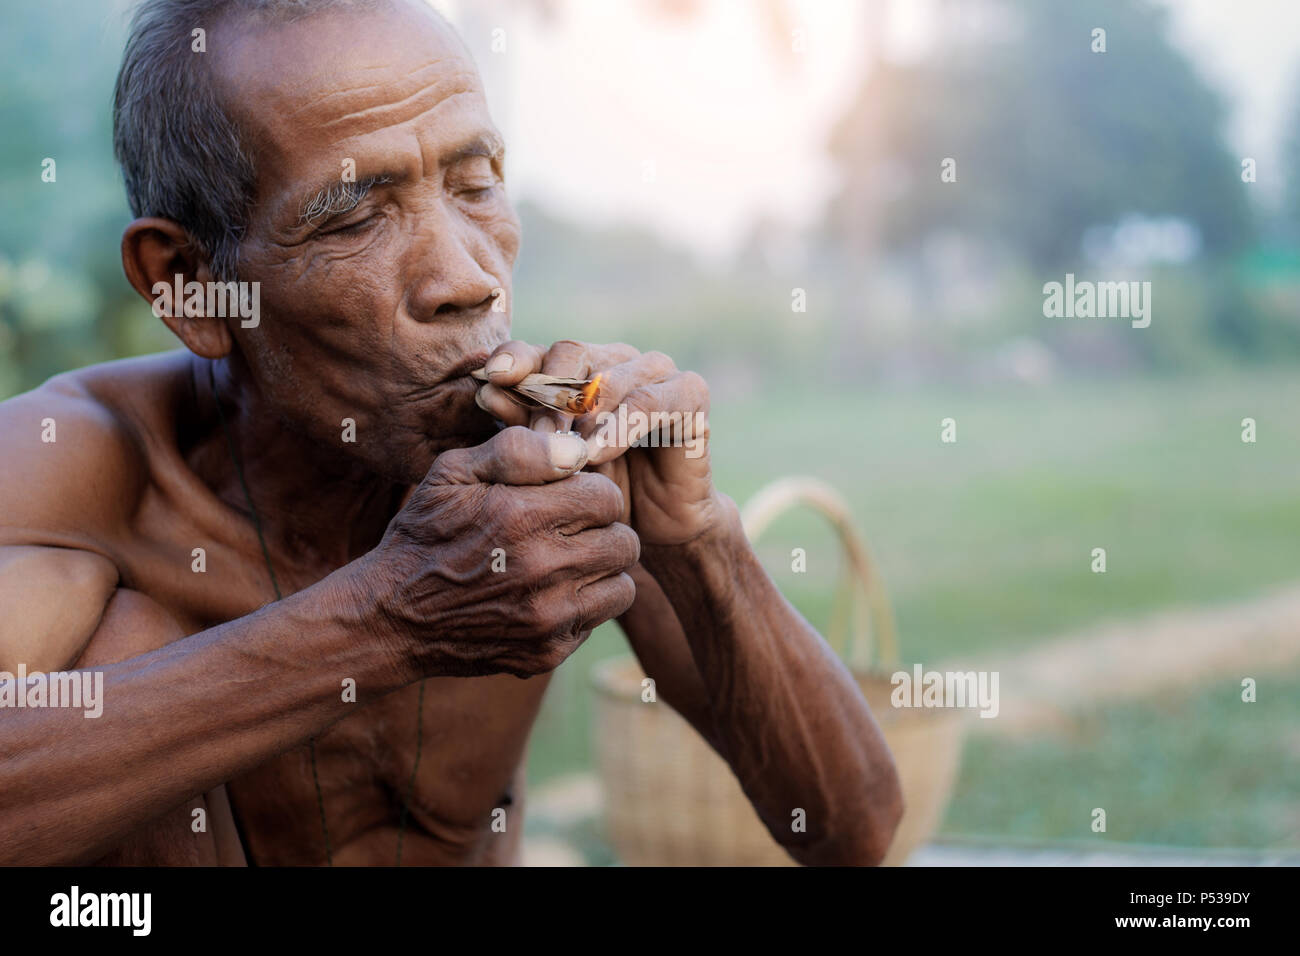 Old men in rural areas are smoking cigarettes. Stock Photo